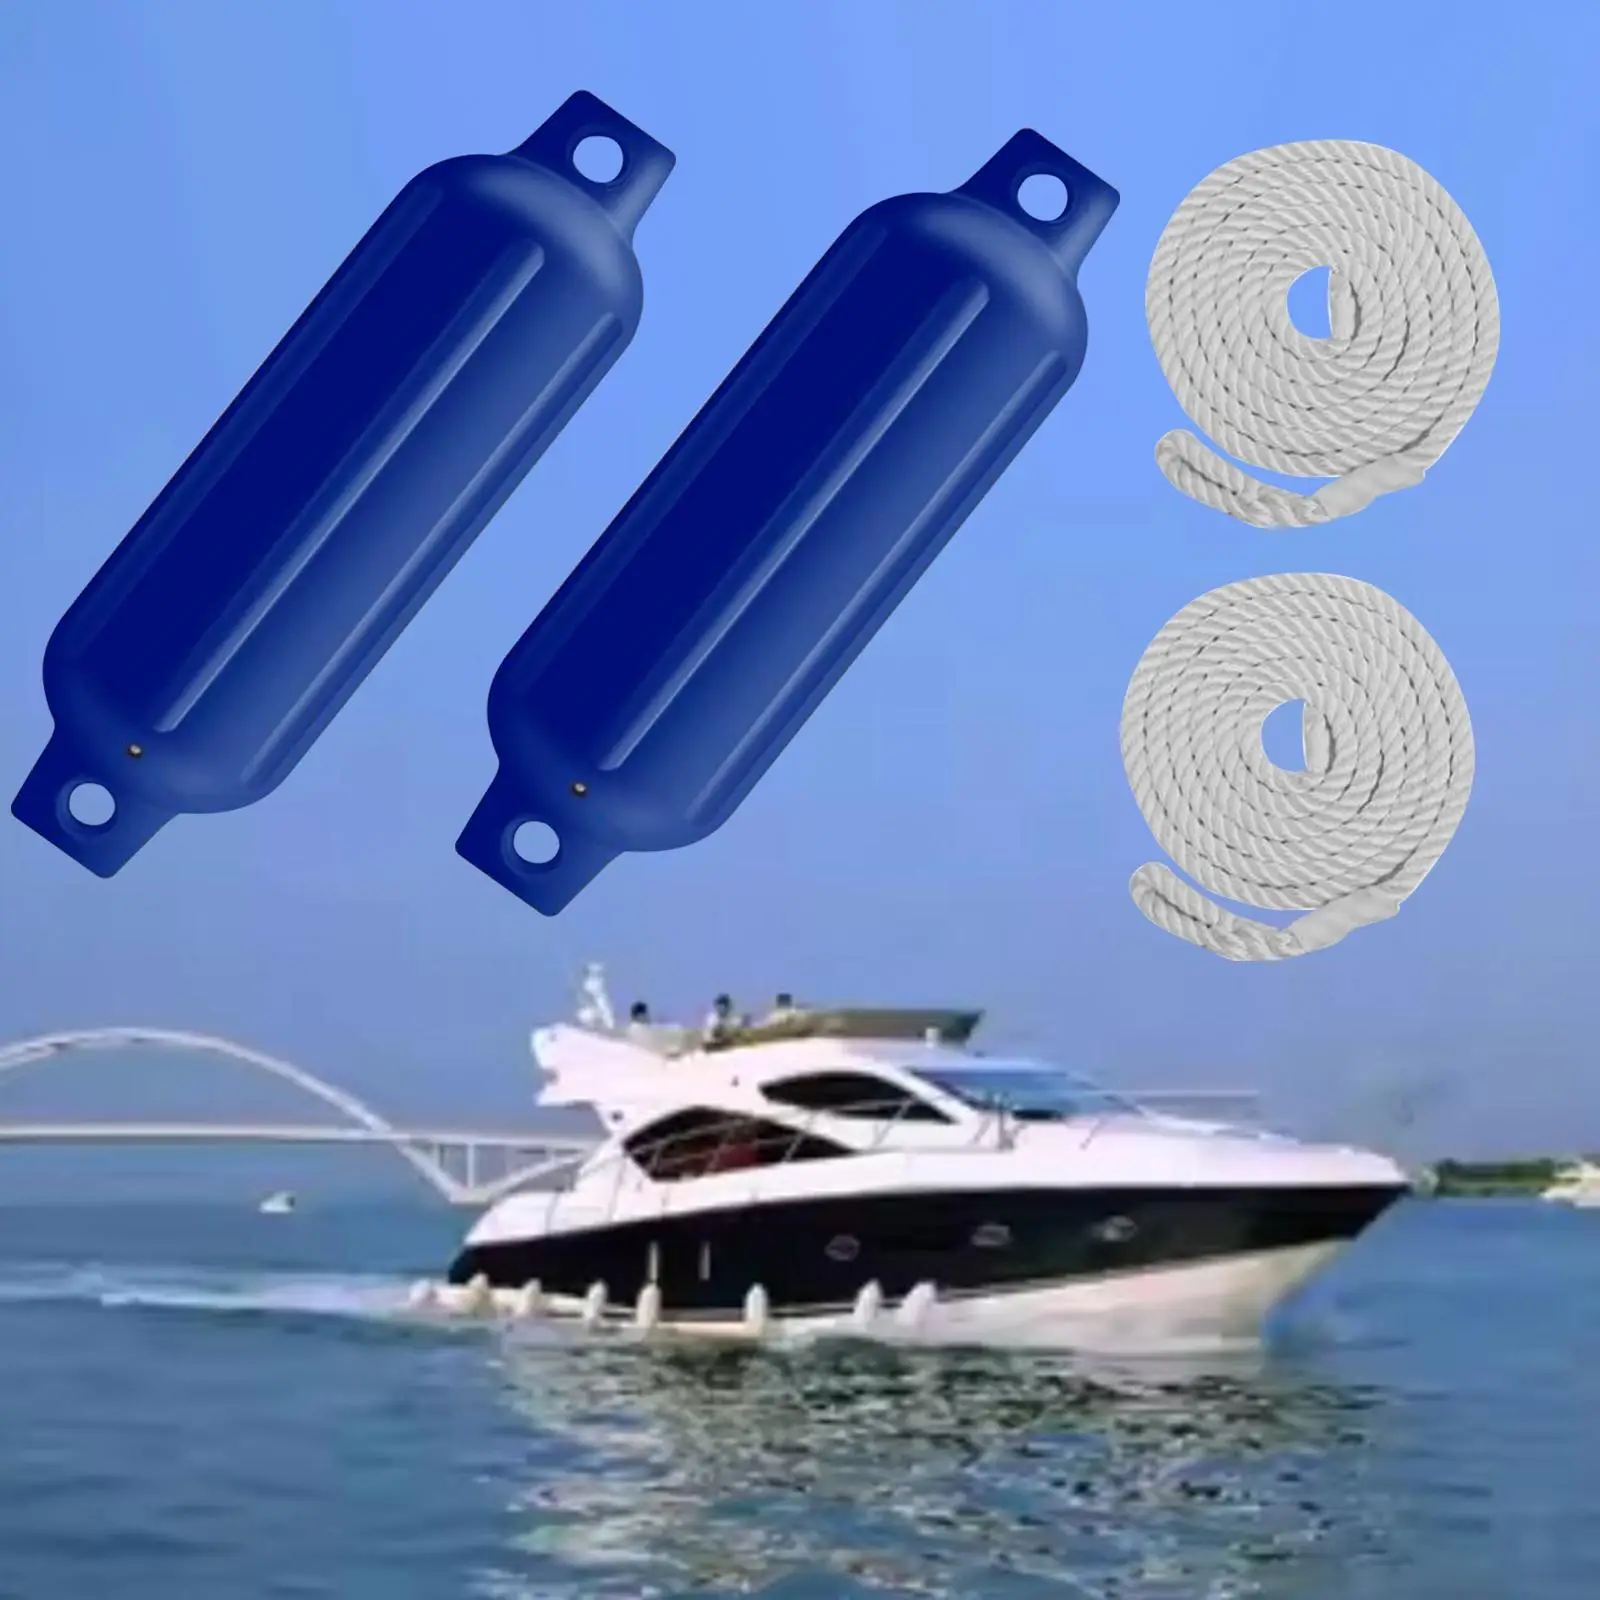 2 Pieces Inflatable Boat s, Accessories, with s Lines for Yachts